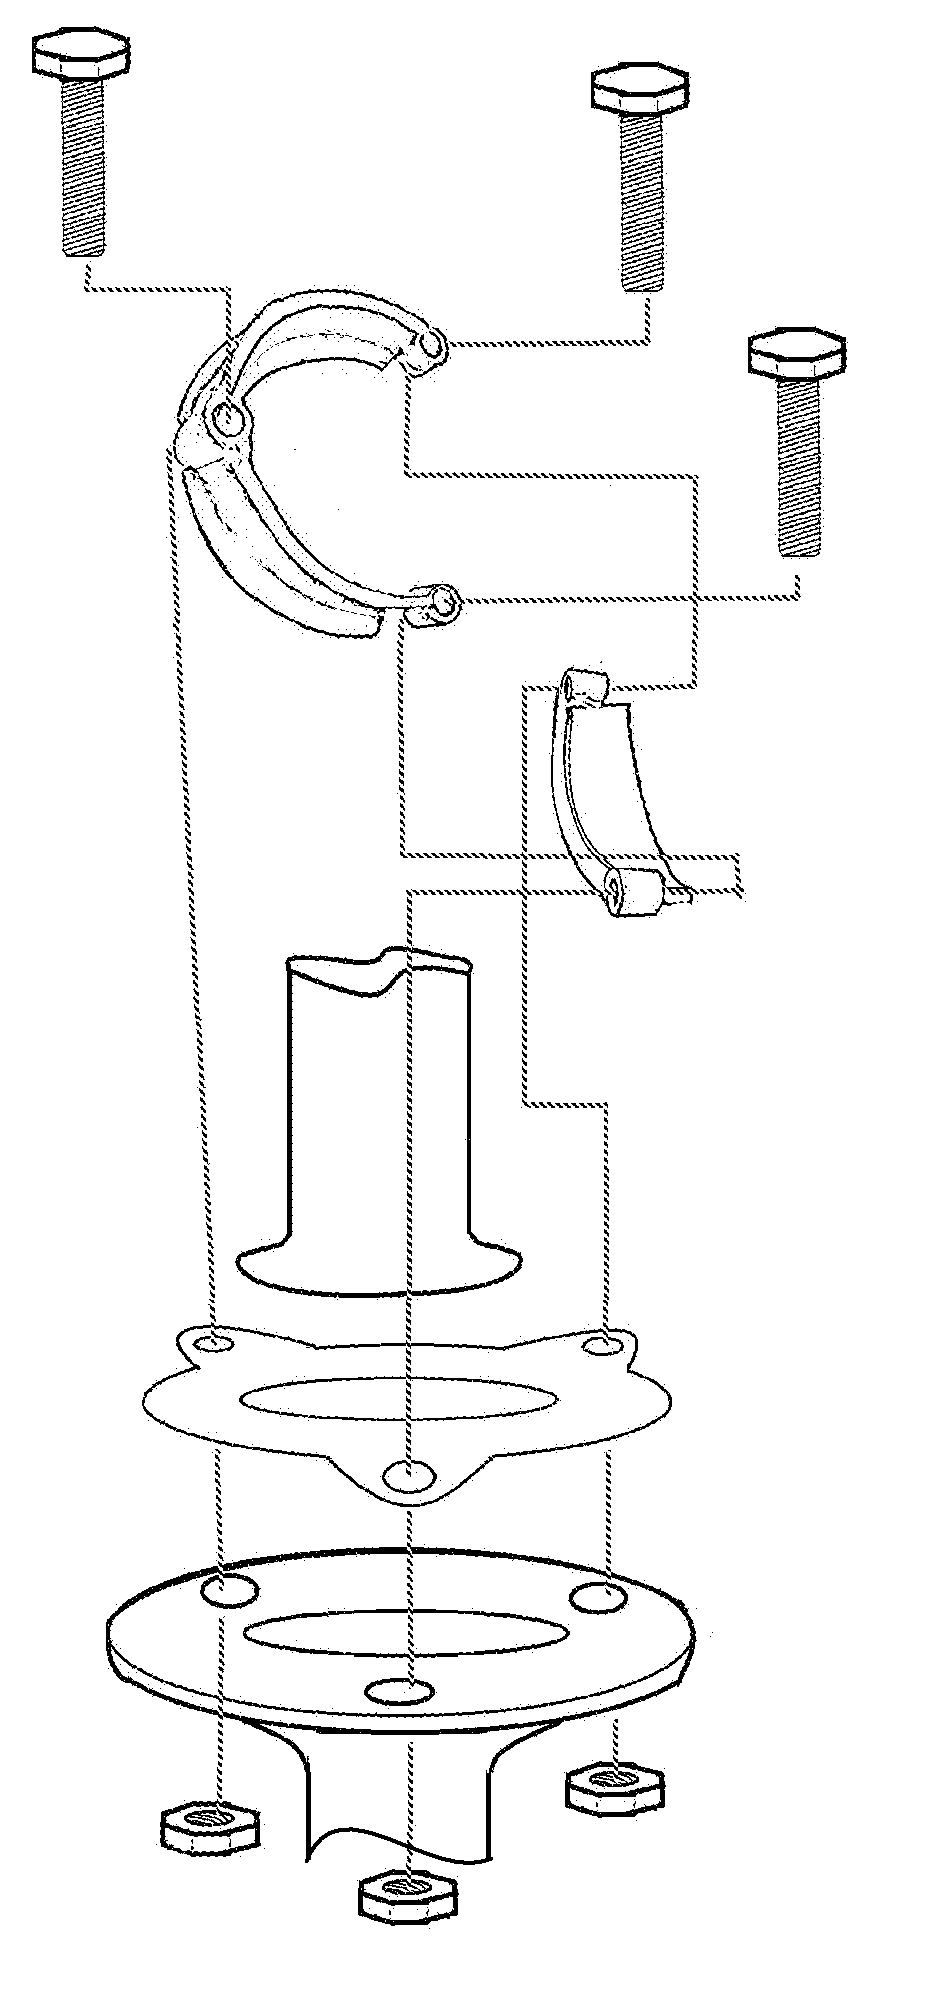 C Flange Bracket fig2 extract.PNG